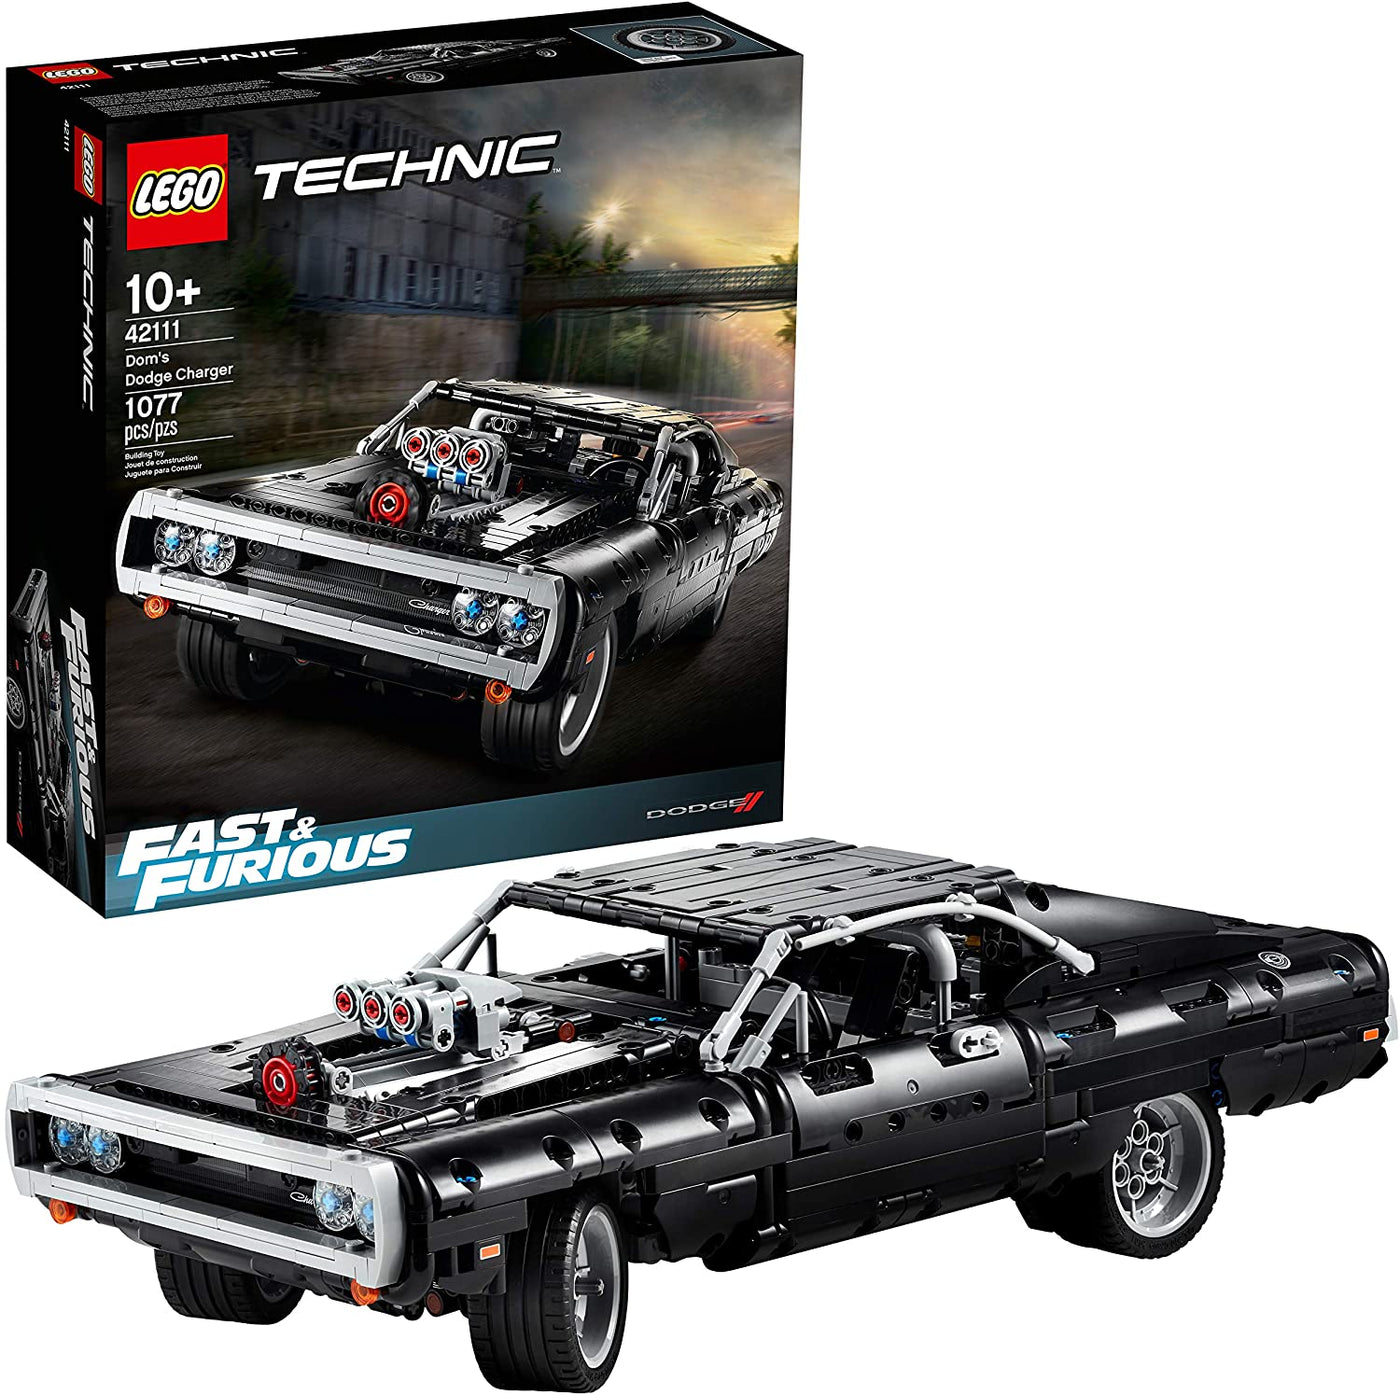 LEG 42111 LEGO Dom's Dodge Charger